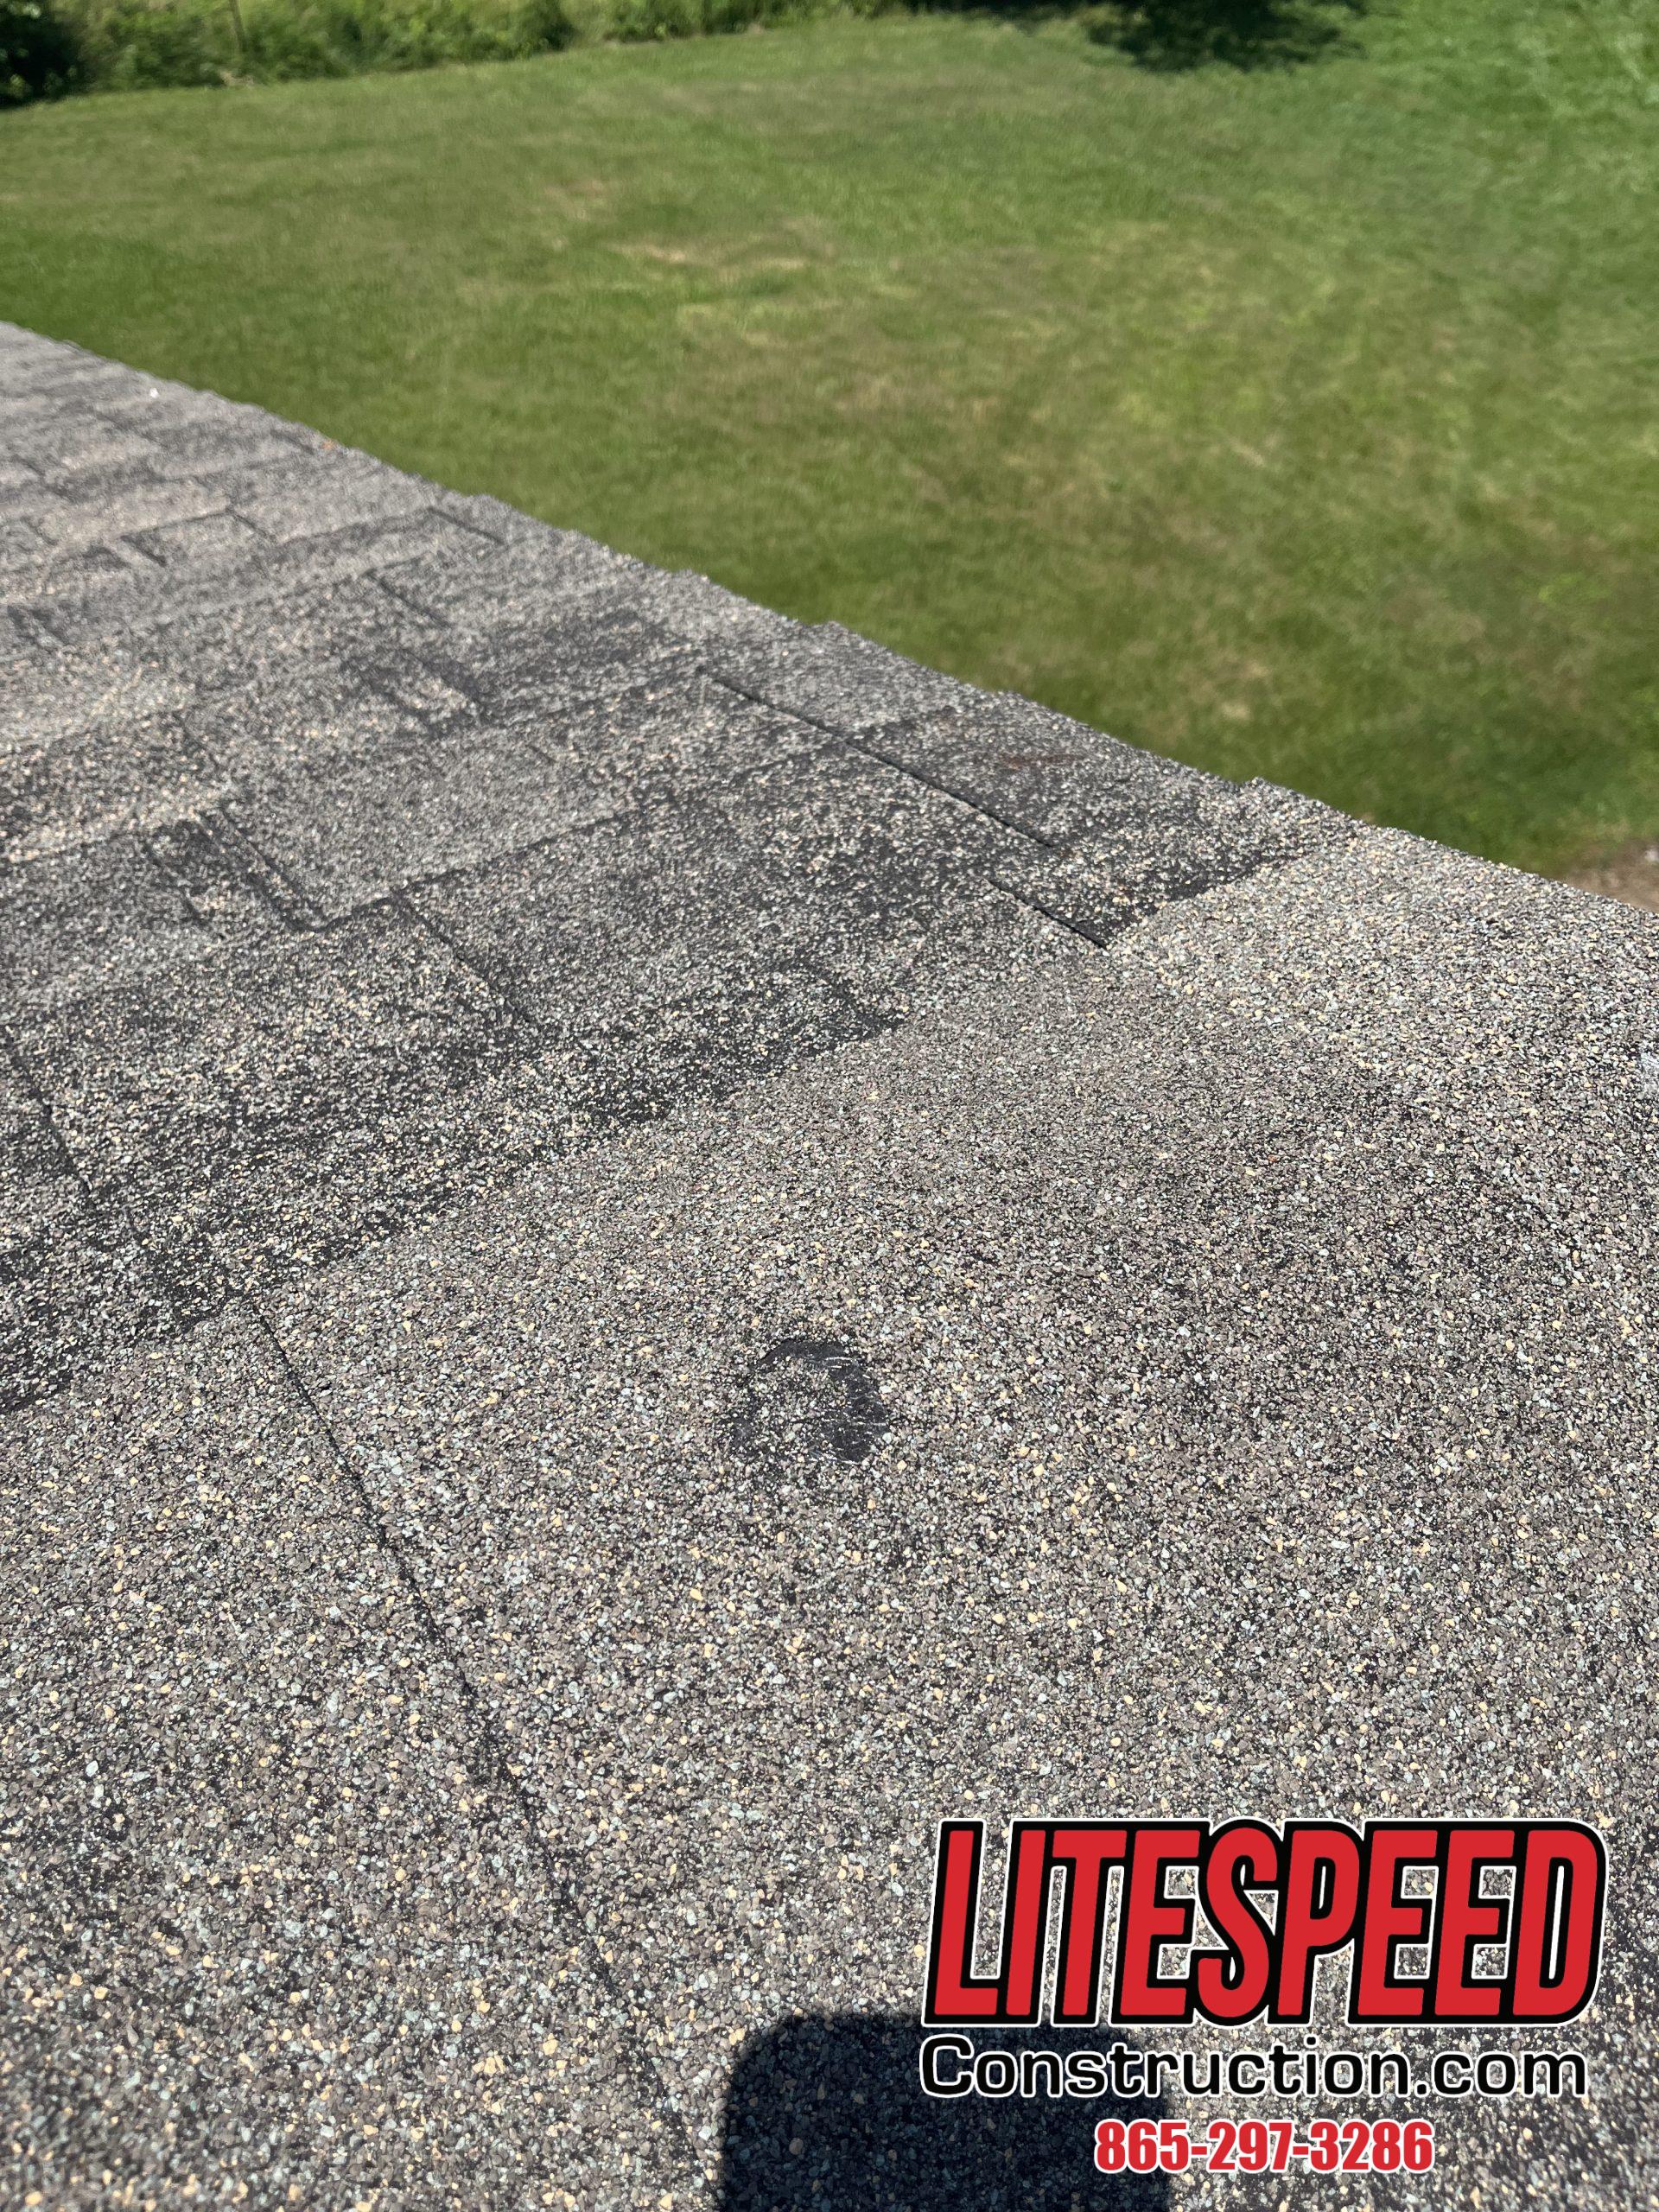 This is a picture of a hole on a ridge cap shingle